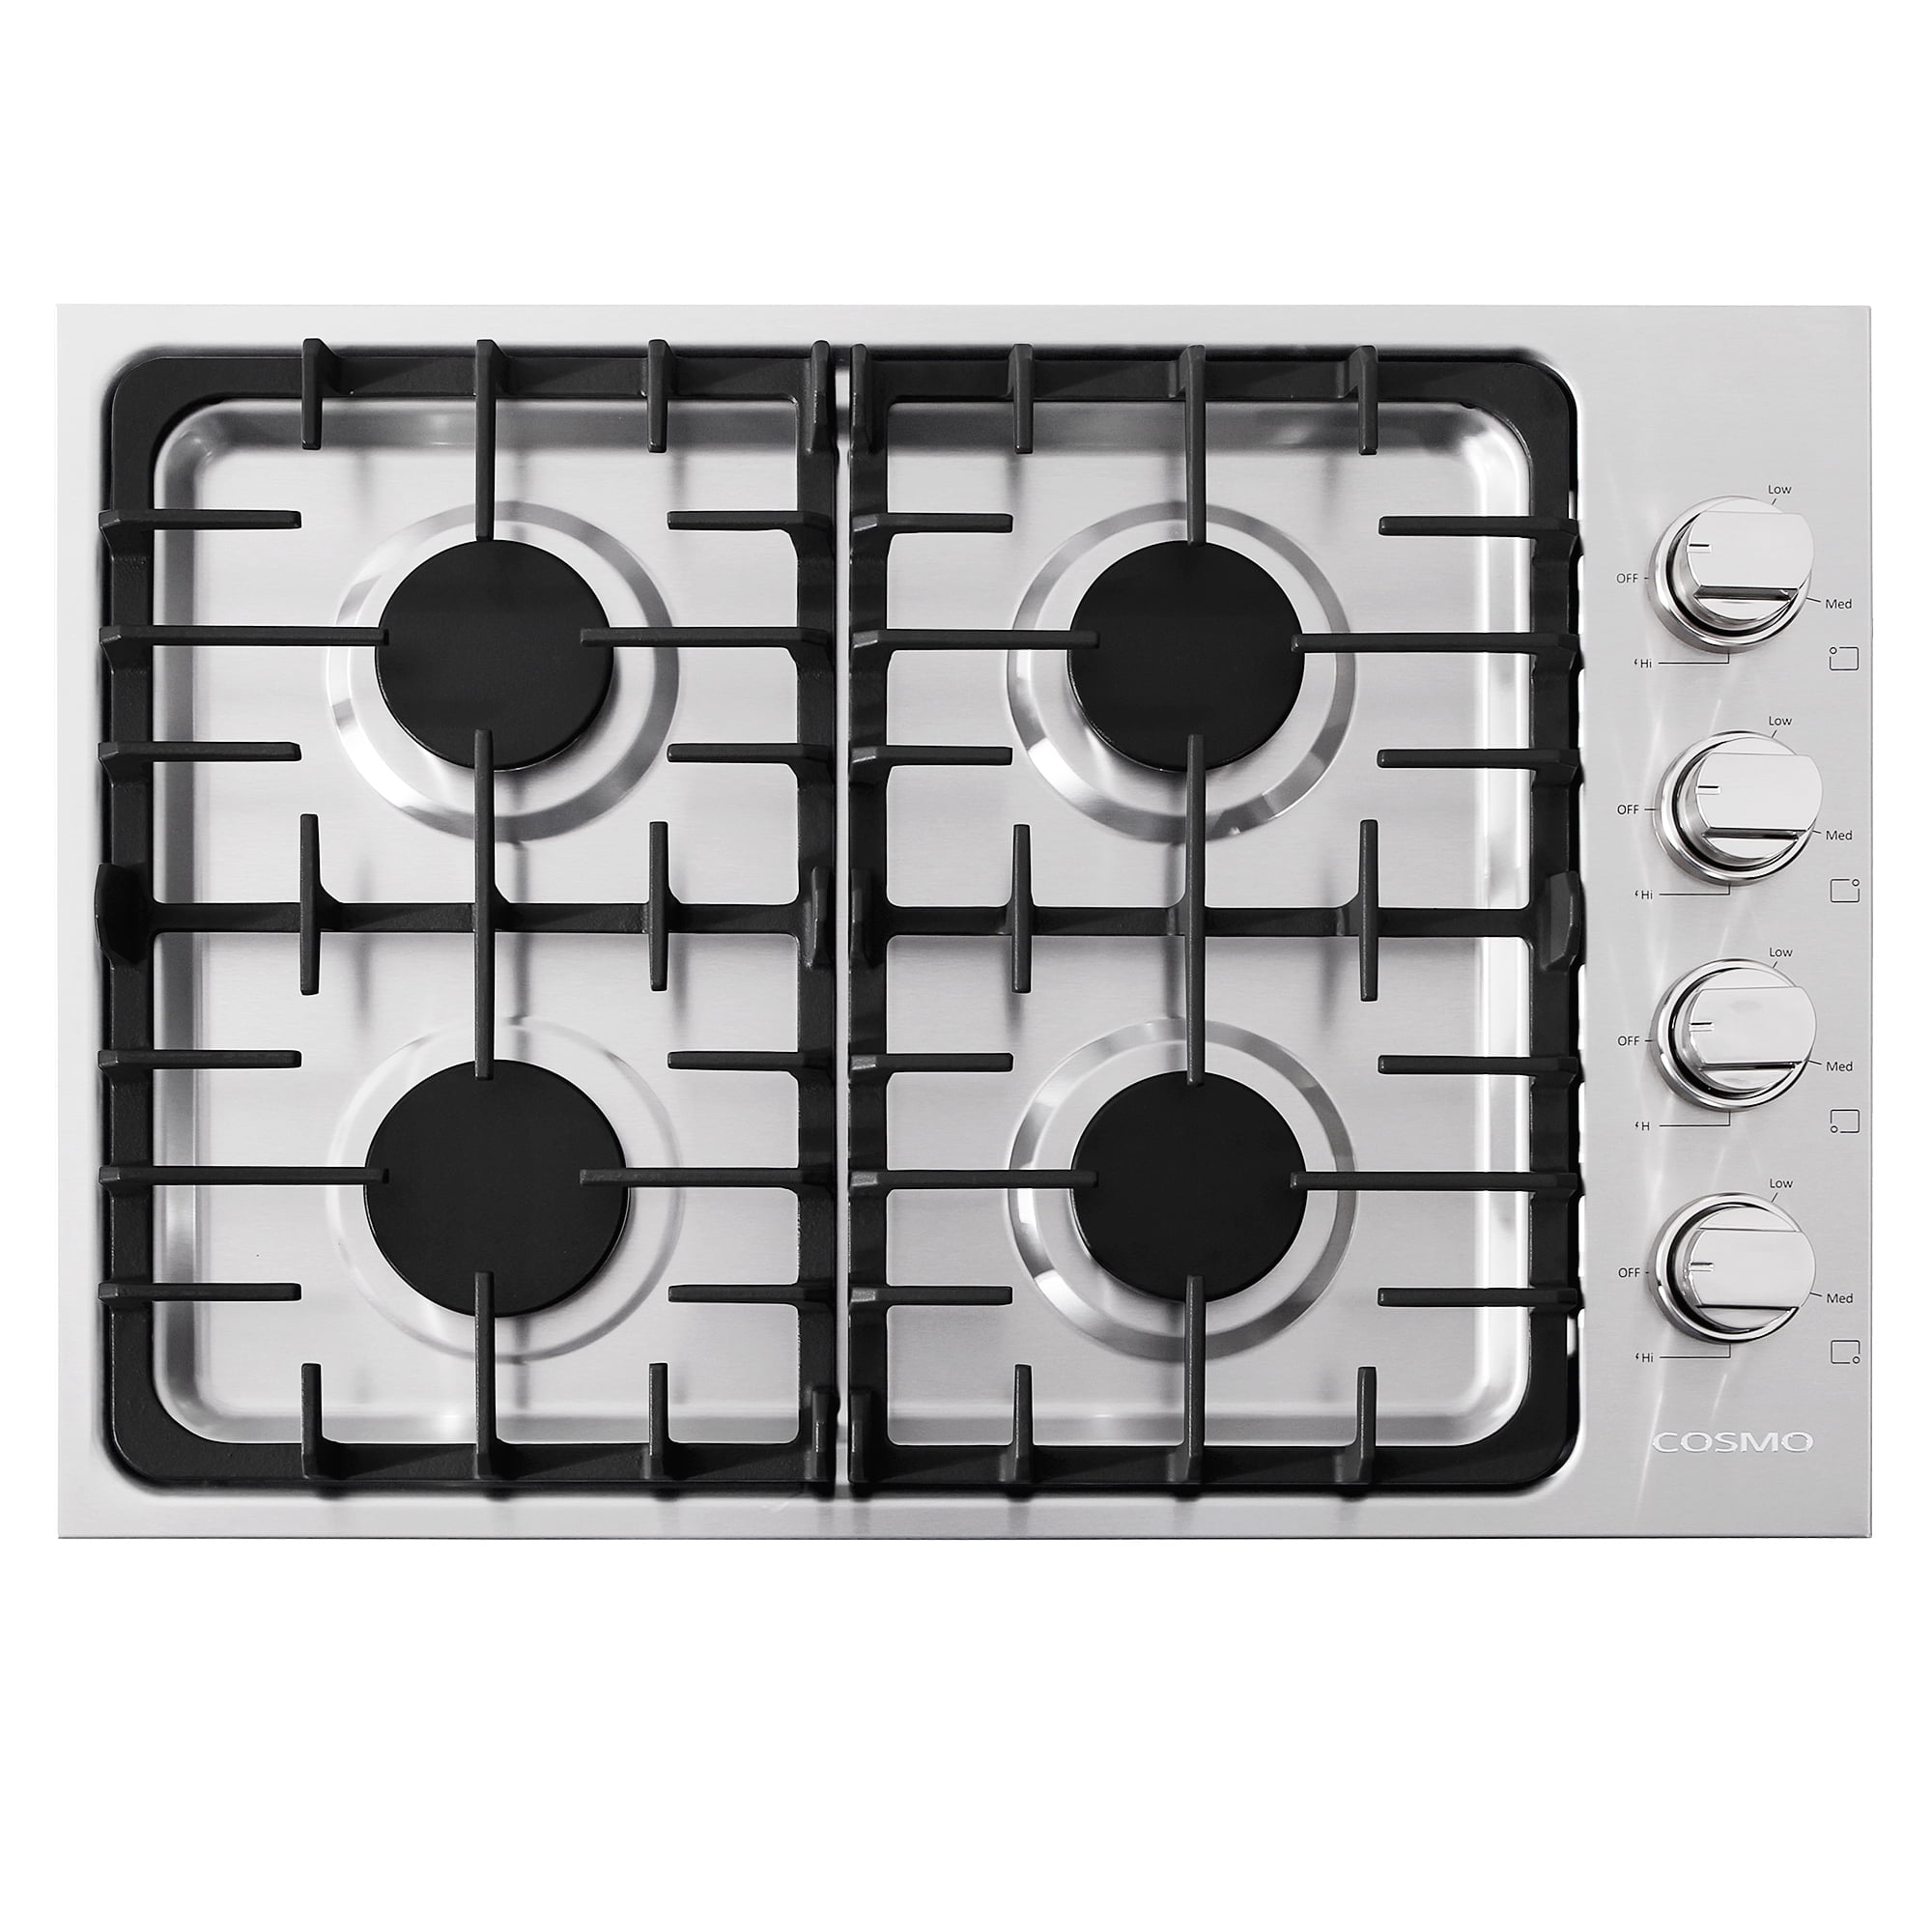 TABU Built-in Gas Cooktop, Stainless Steel Gas Stove Countertop, Easy to  Clean (5 Burners)